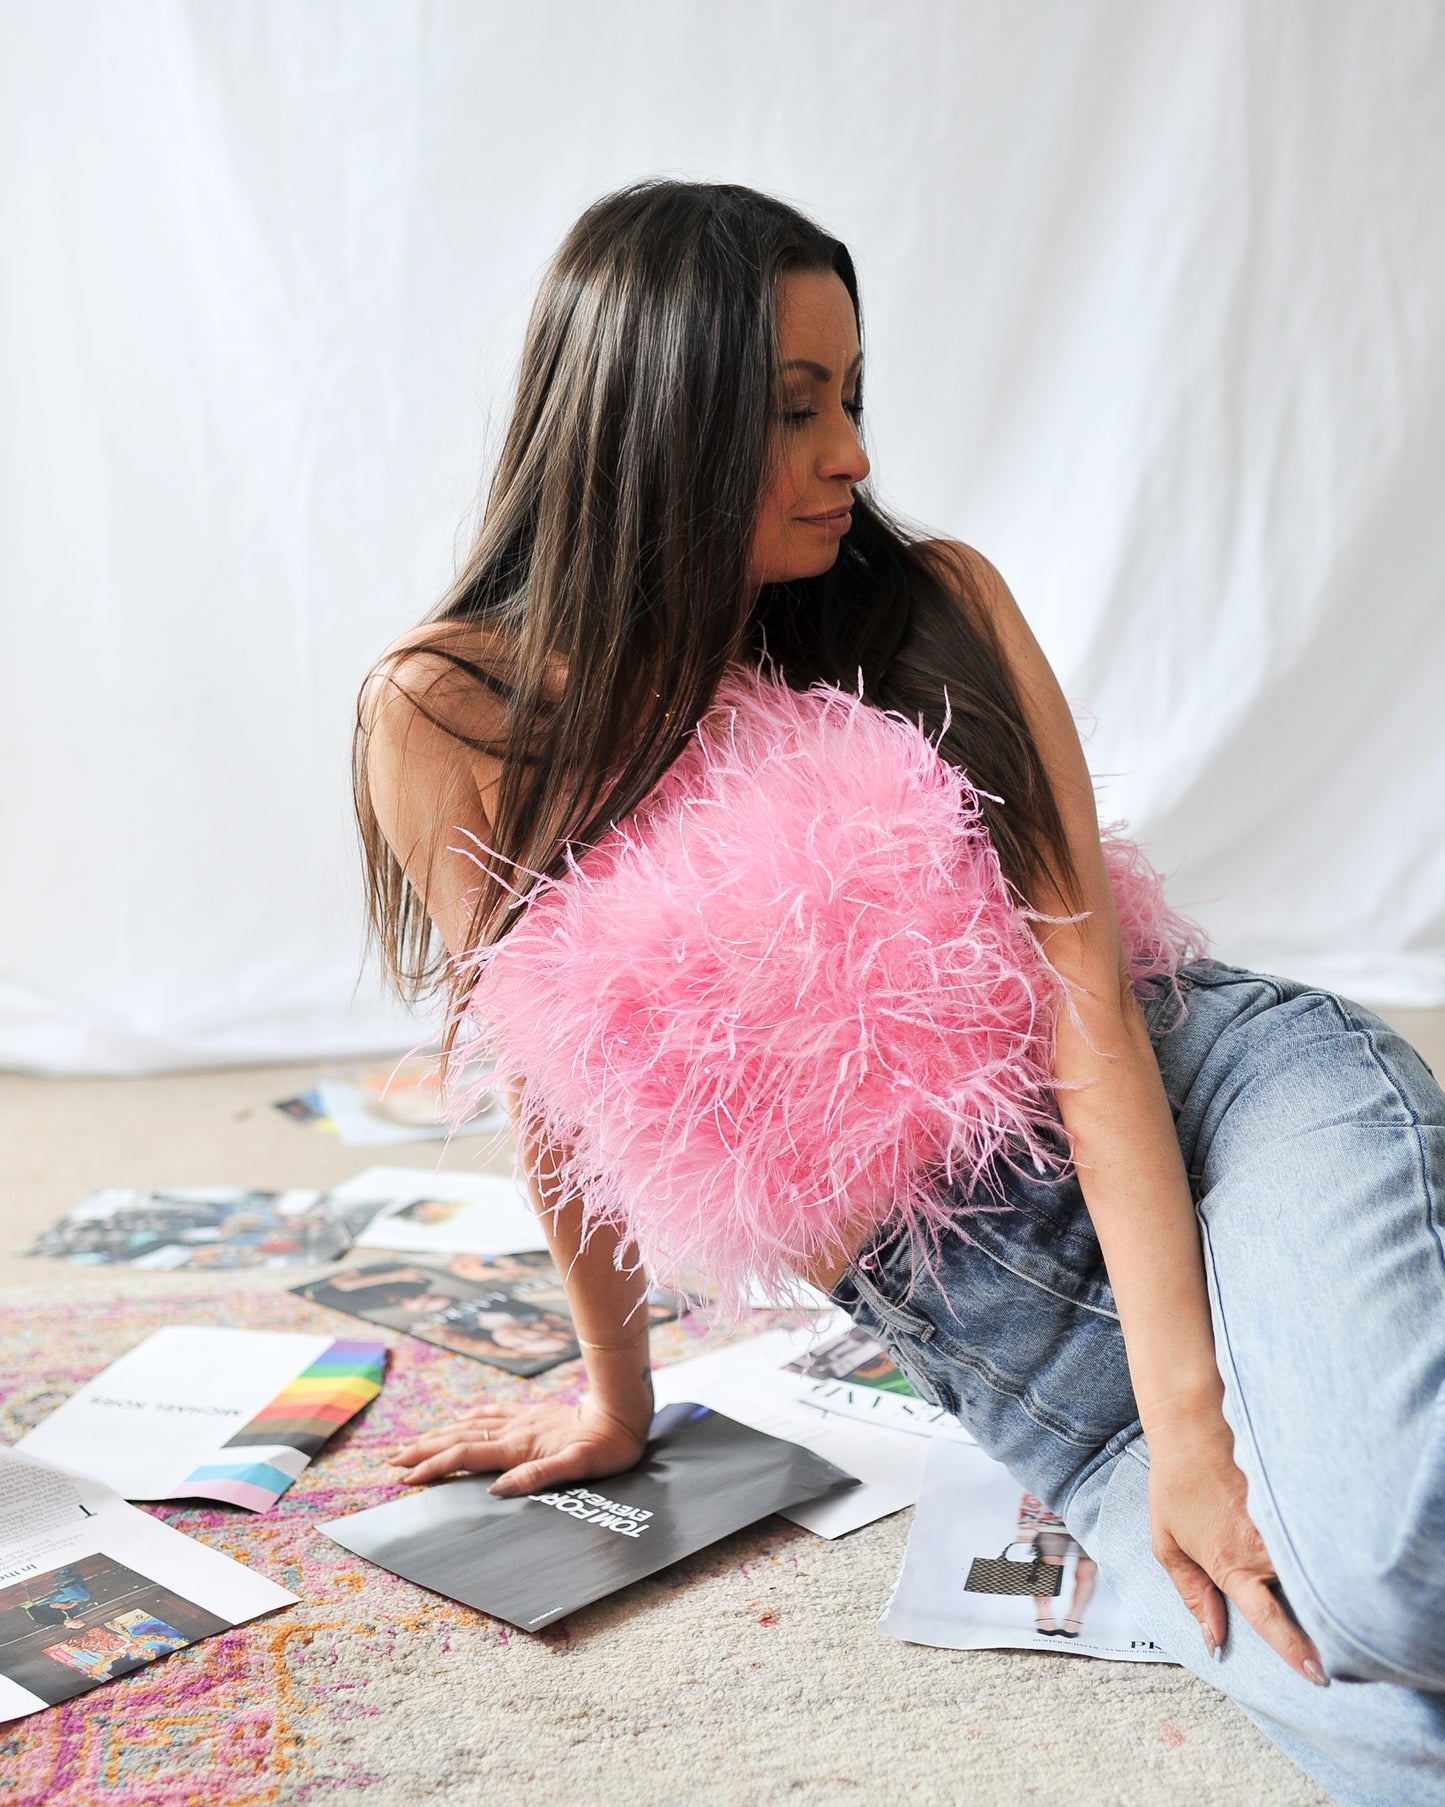 Fancy Baby Pink Feather Top